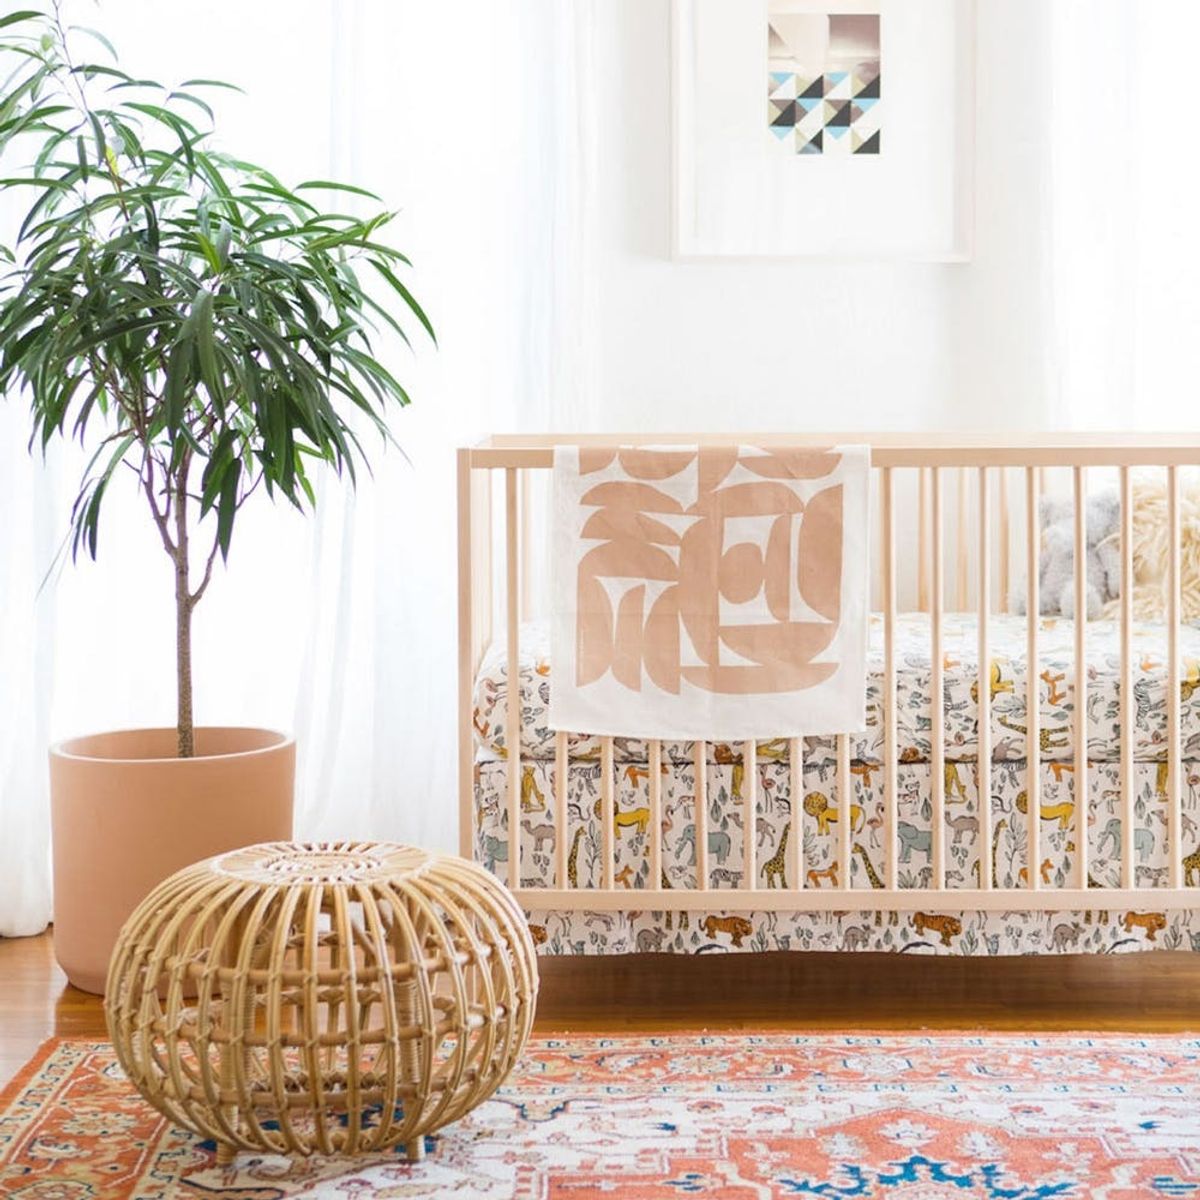 The Retro Nursery Trend You’re About to See Everywhere in 2018